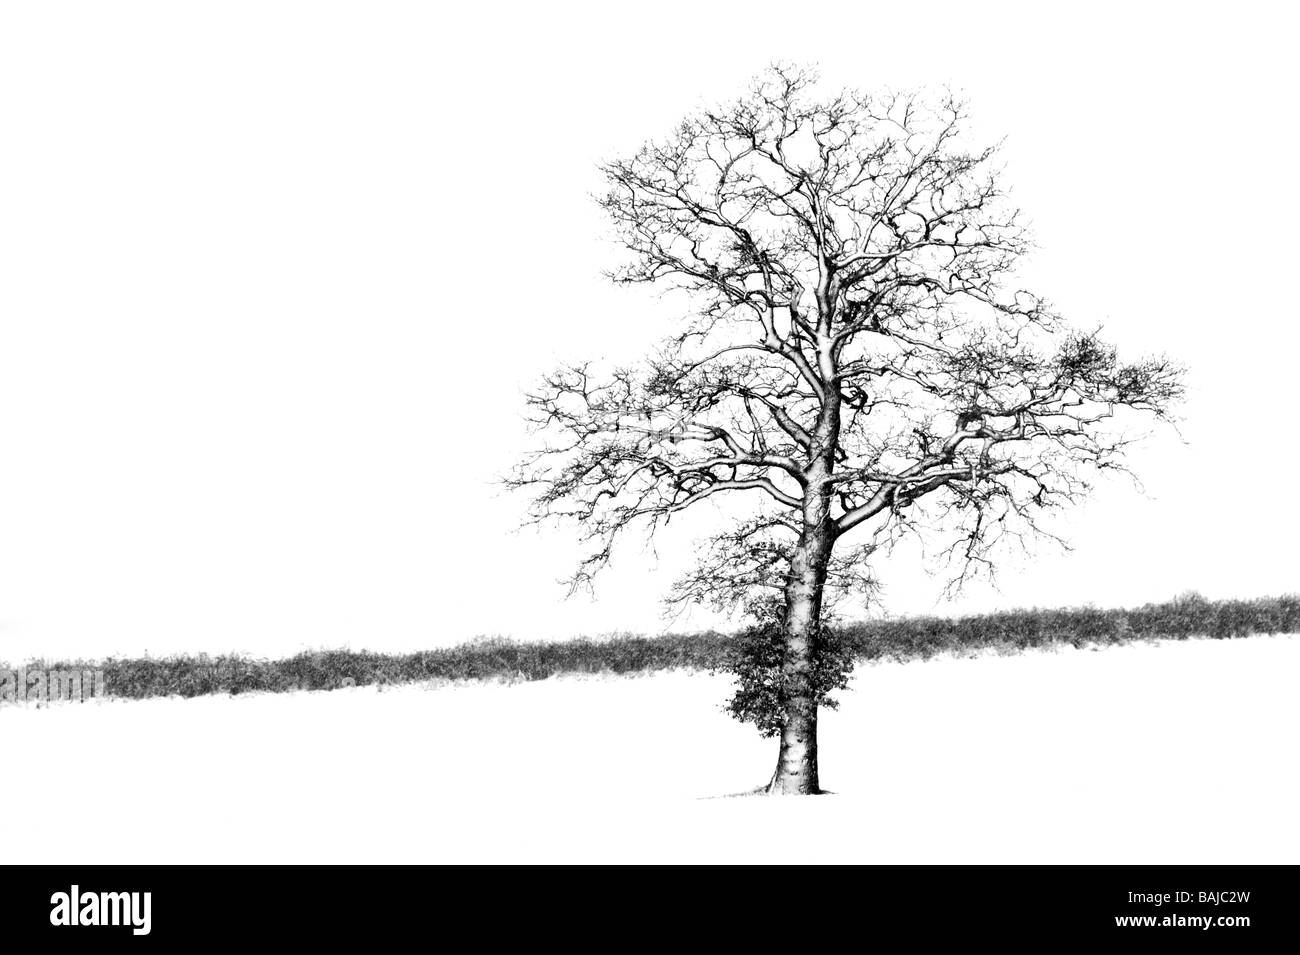 An oak tree blasted with snow during a blizzard standing isolated in a snowy field Stock Photo